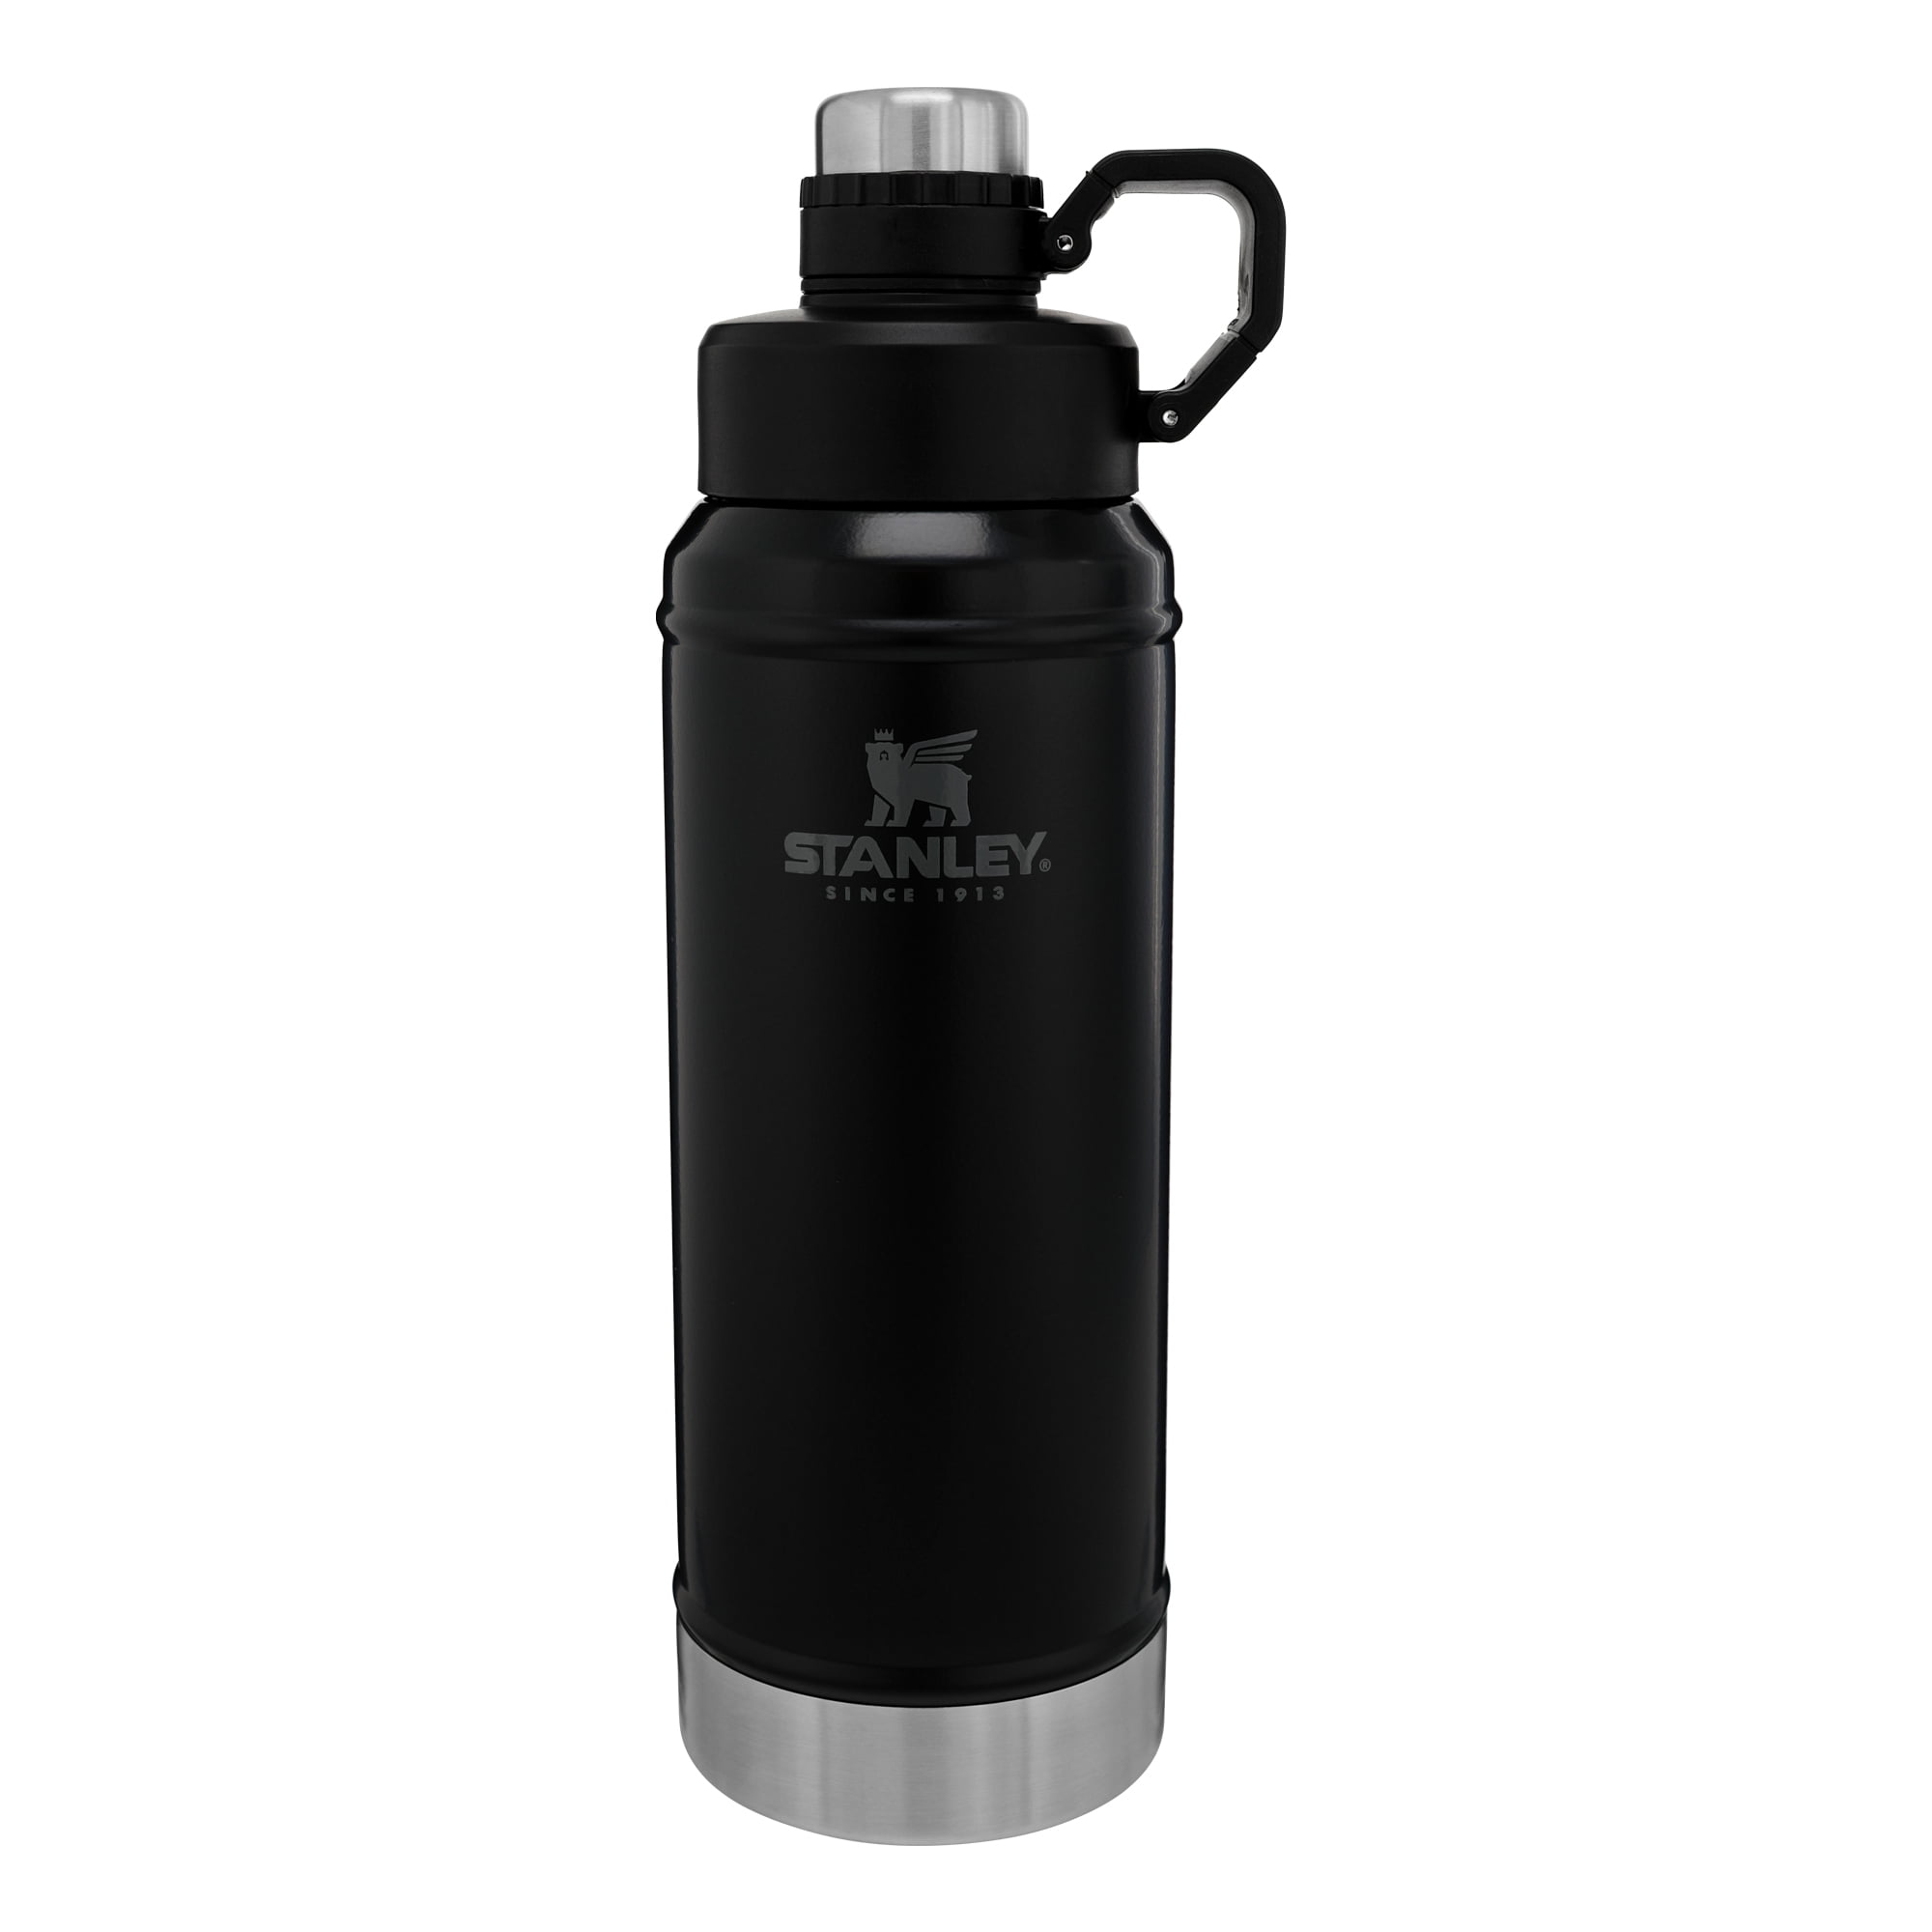 Stanley Classic Legendary Bottle 0.75L Matte Black – BPA Free Stainless Steel Thermos Dishwasher Safe Leakproof Lid Doubles as Cup Keeps Cold or Hot for 20 Hours